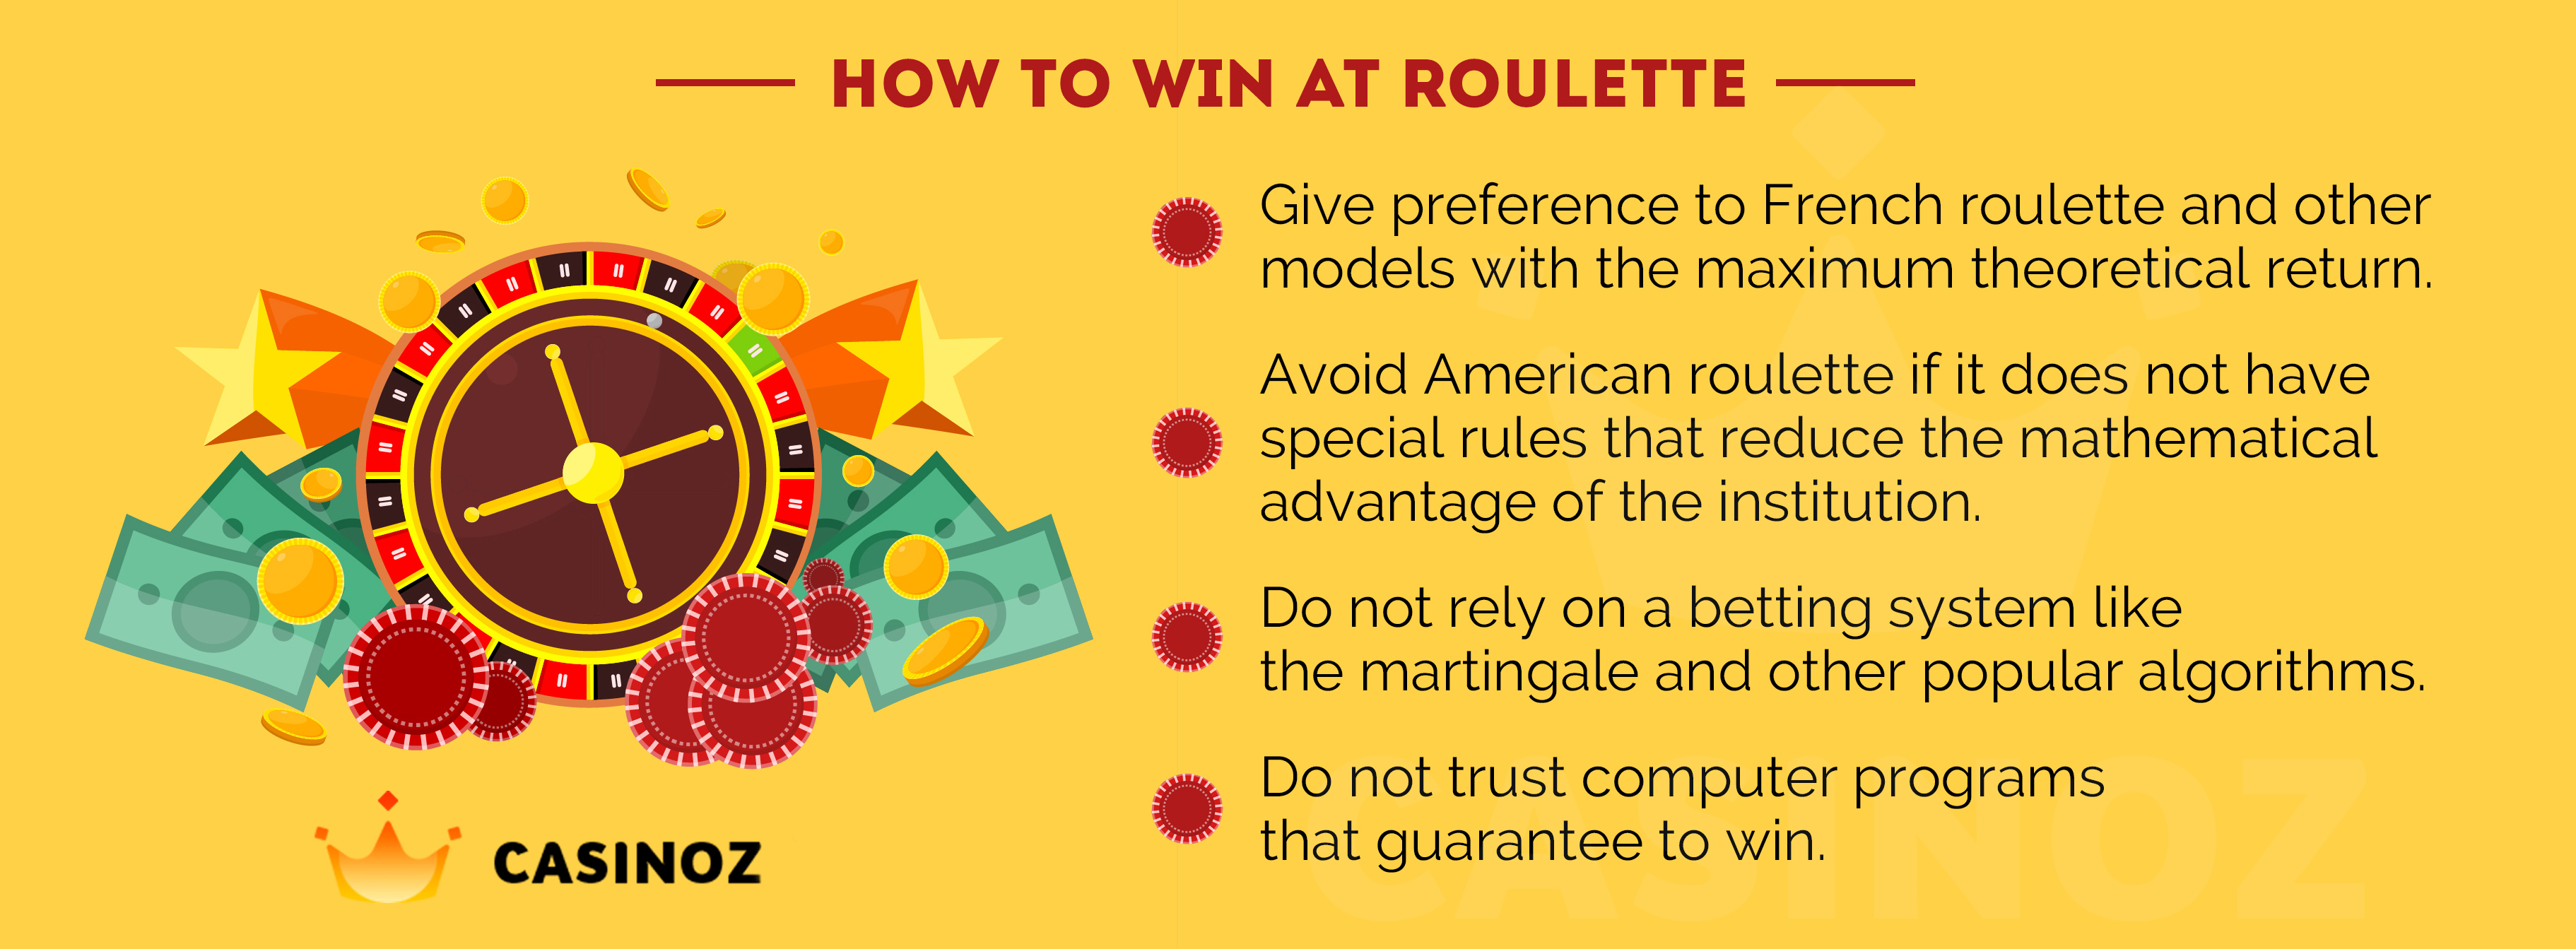 rules roulette